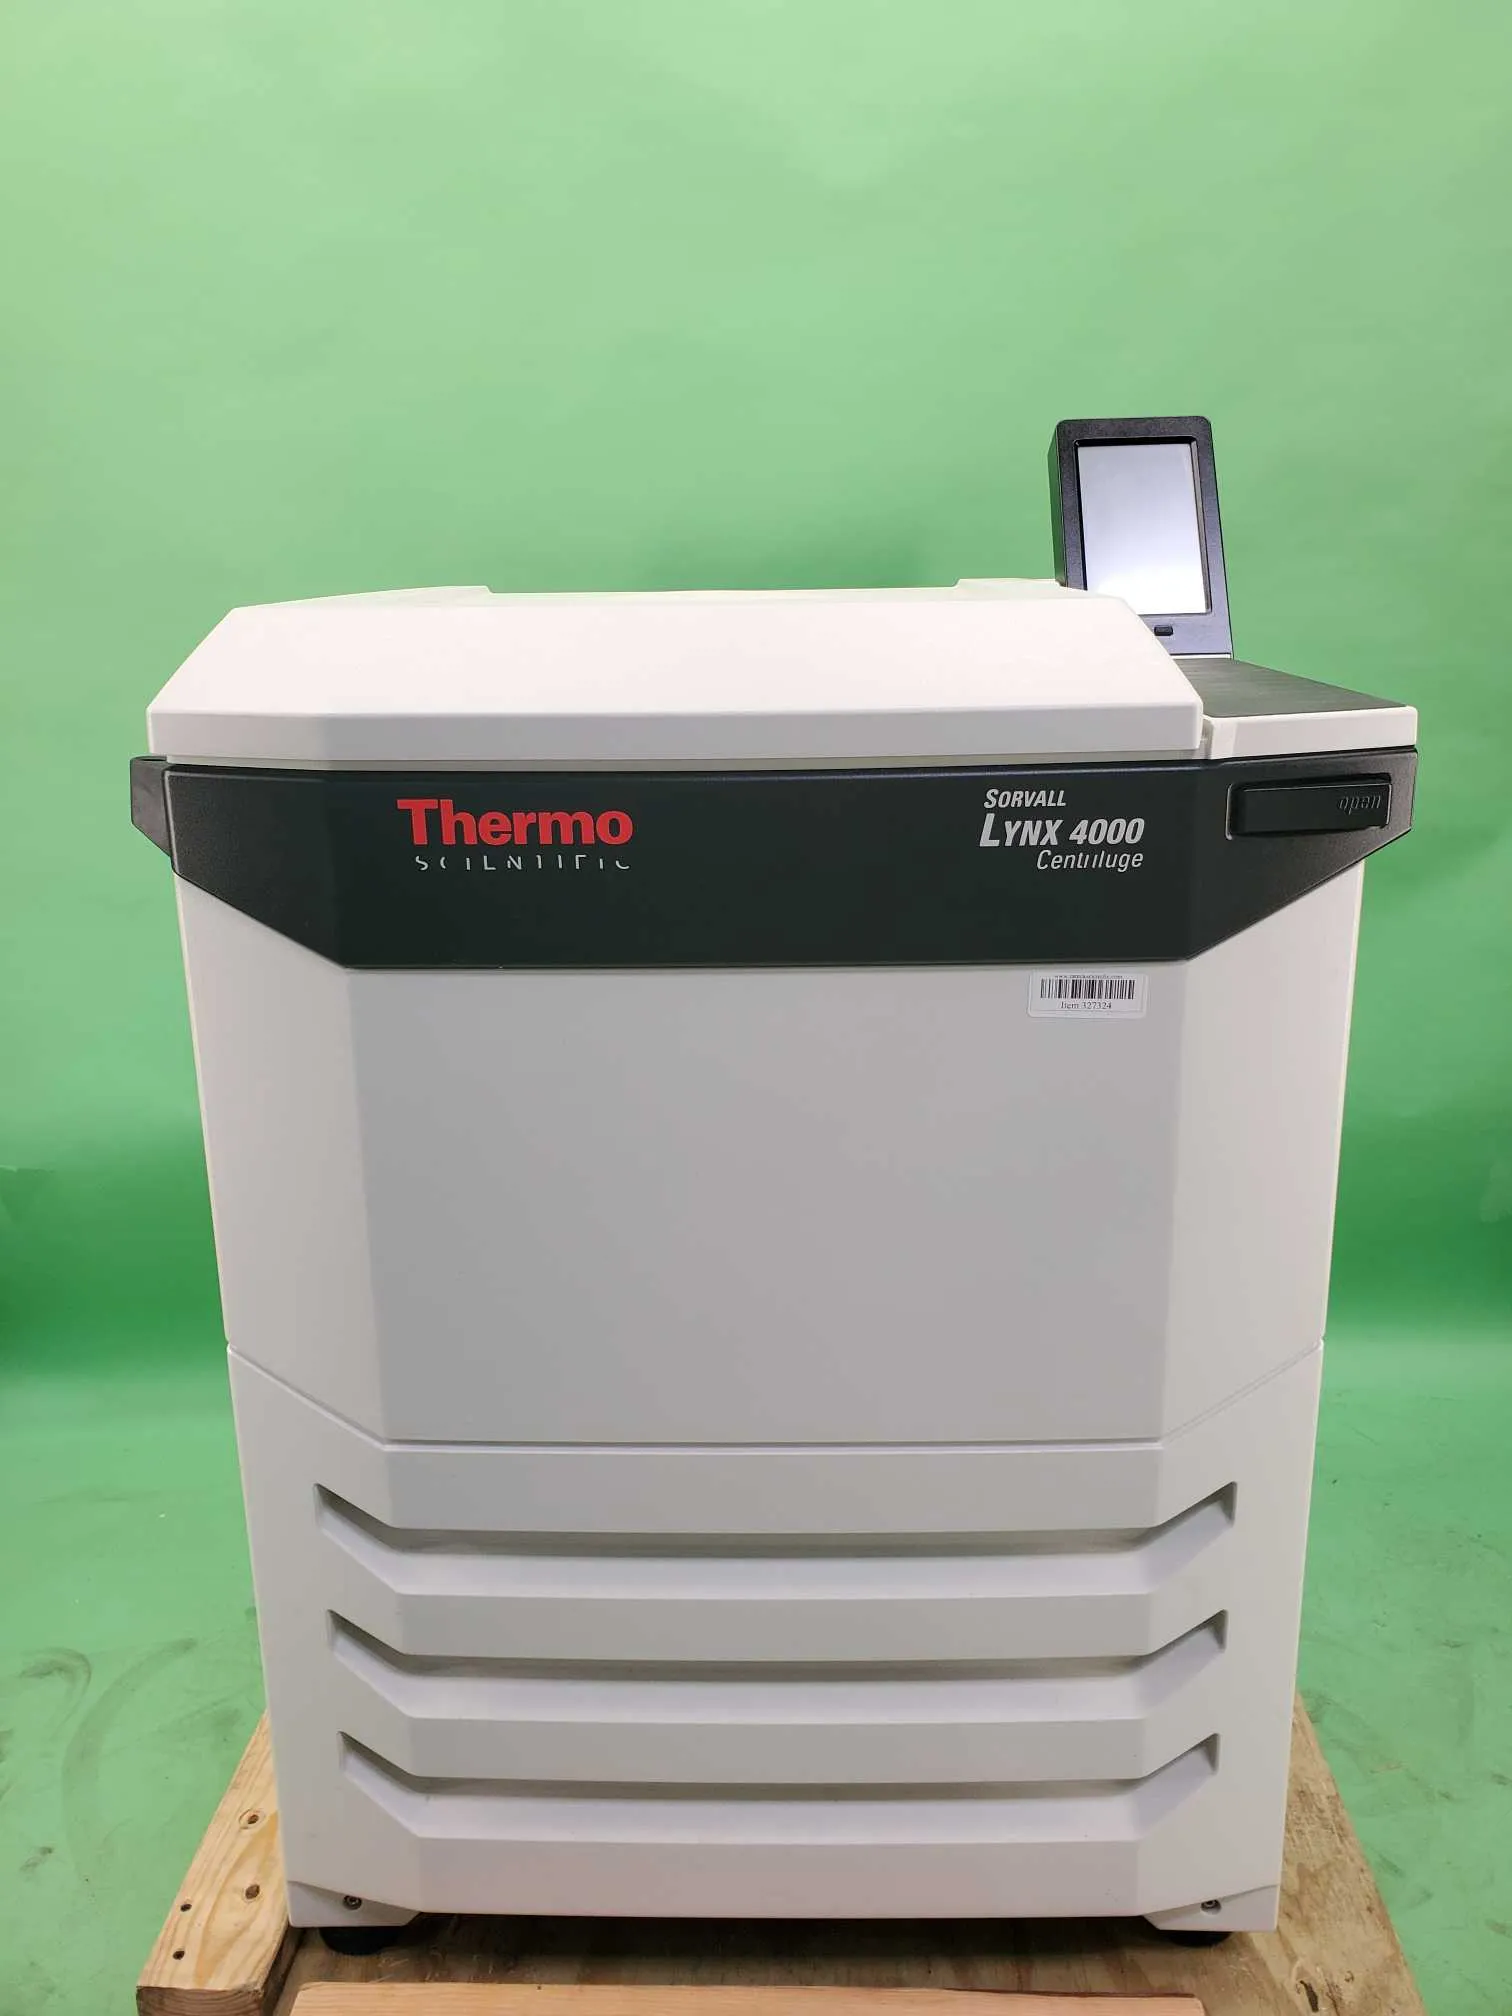 Thermo Scientific Sorvall Lynx 4000 Superspeed Centrifuge